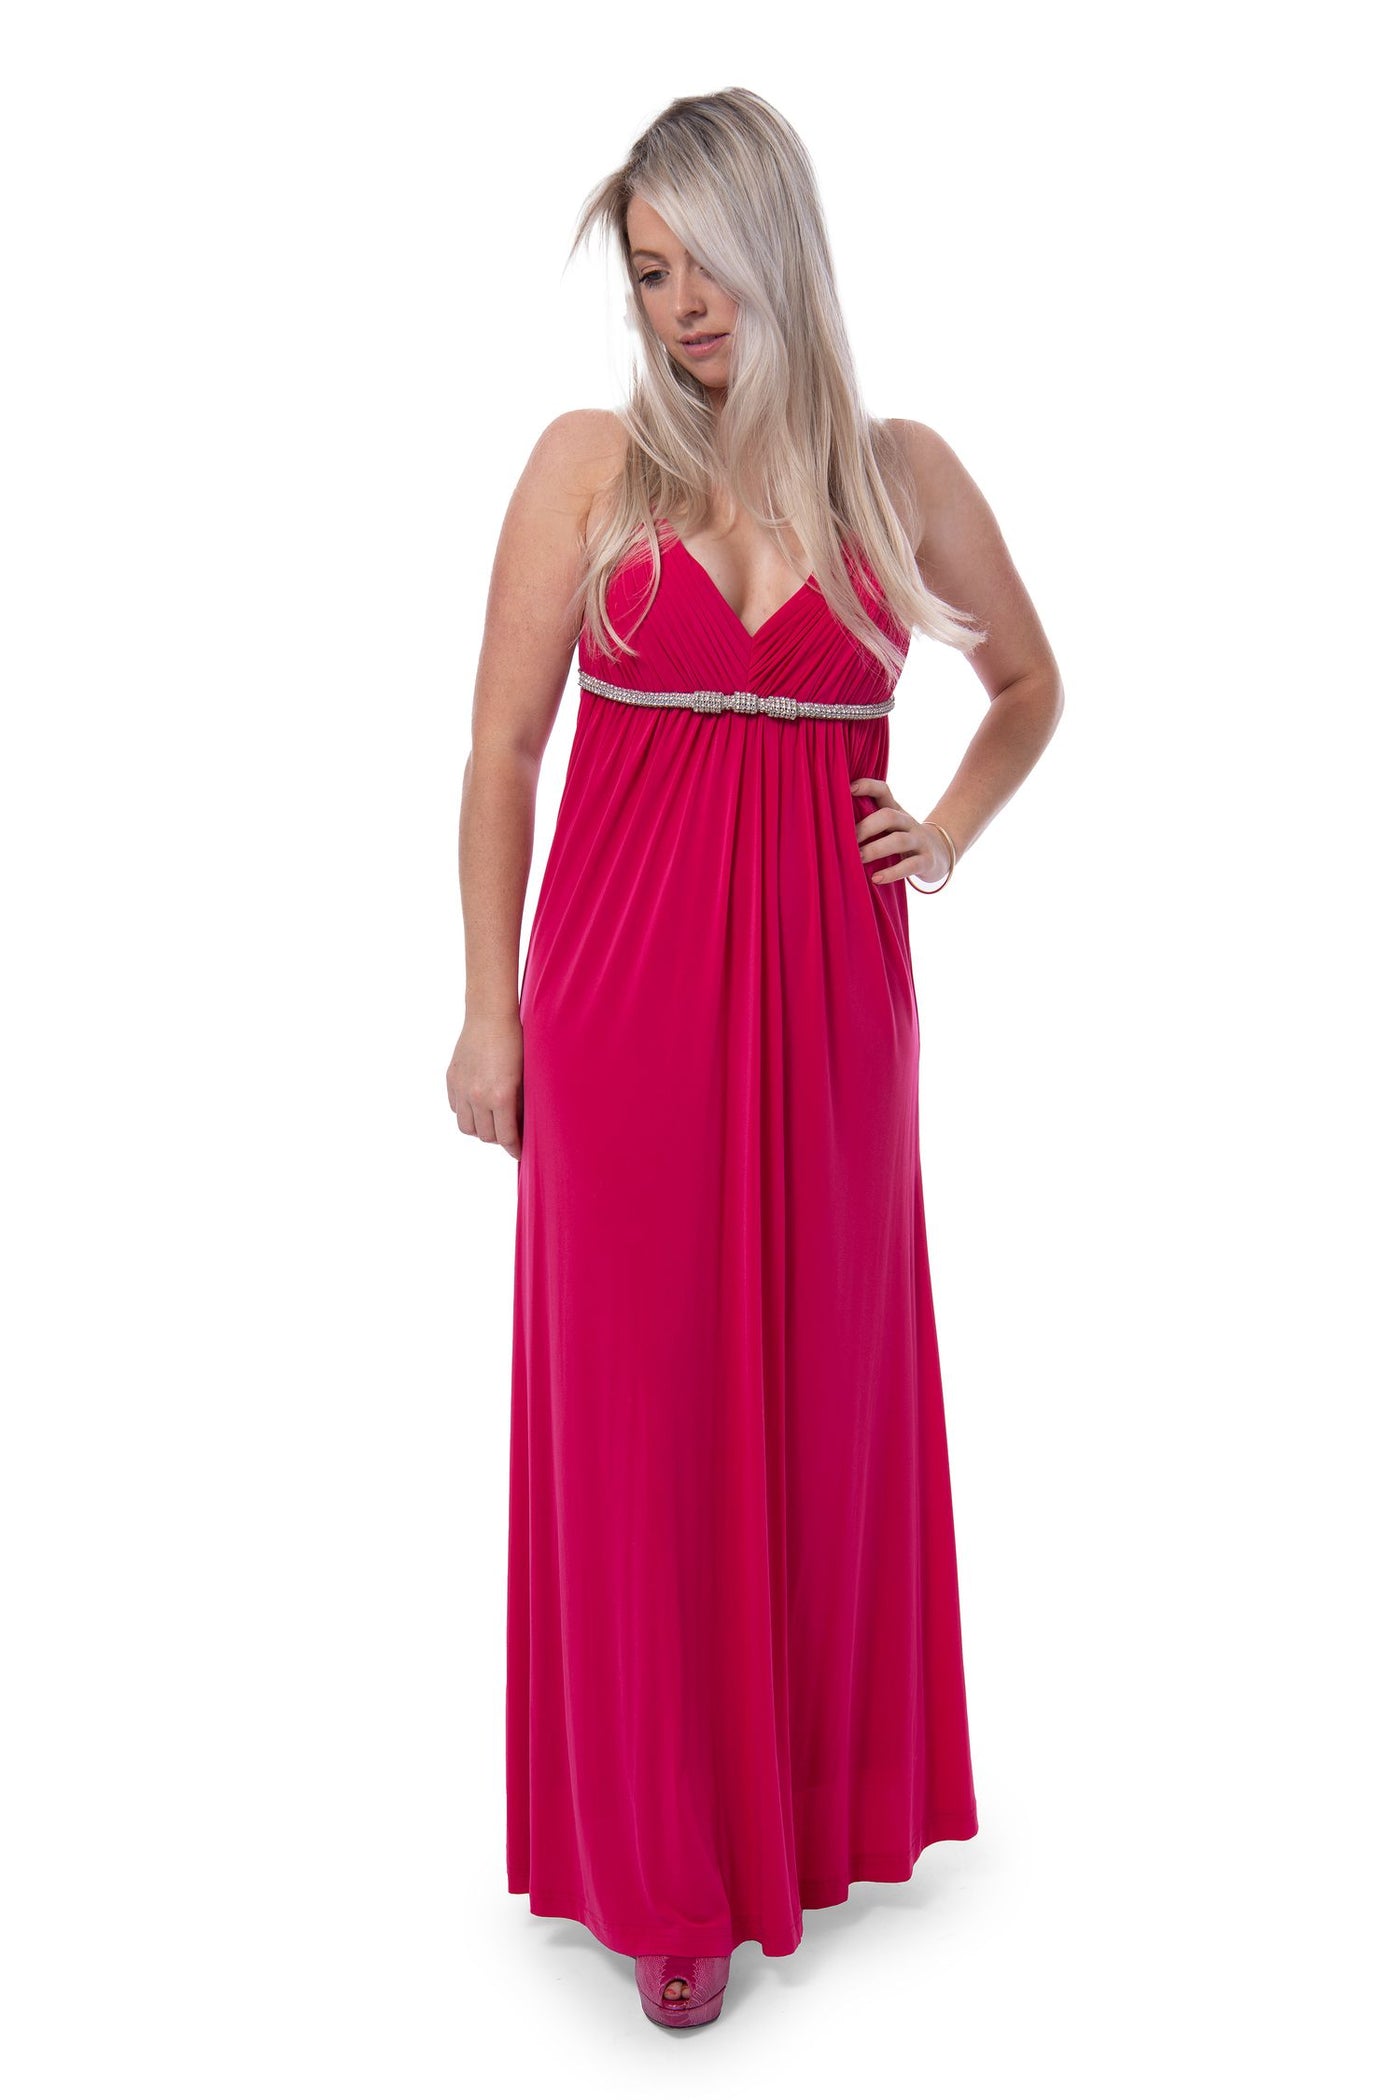 Pink evening gown with diamante straps and belt - brand new rtp 349